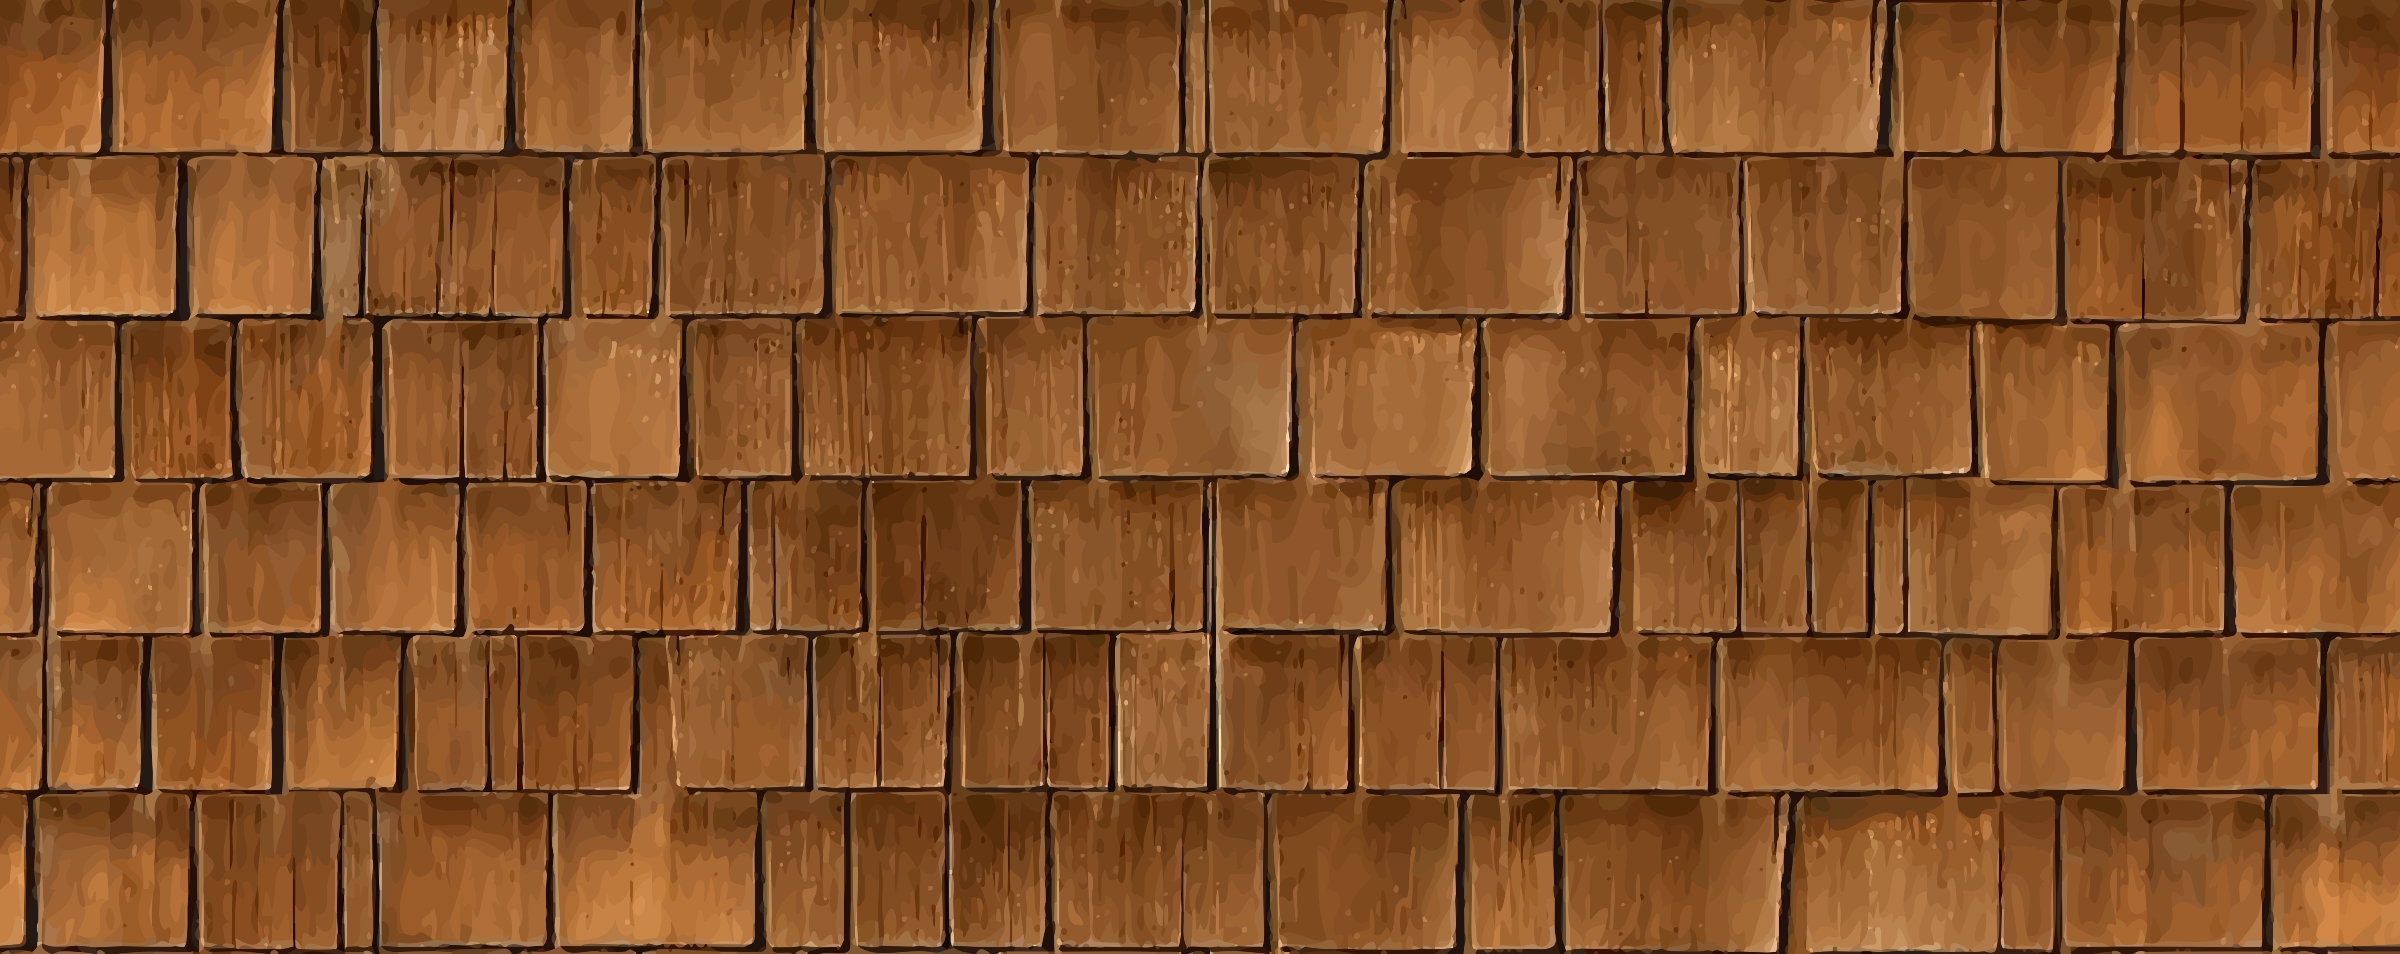 Wood shingles clipart - Clipground